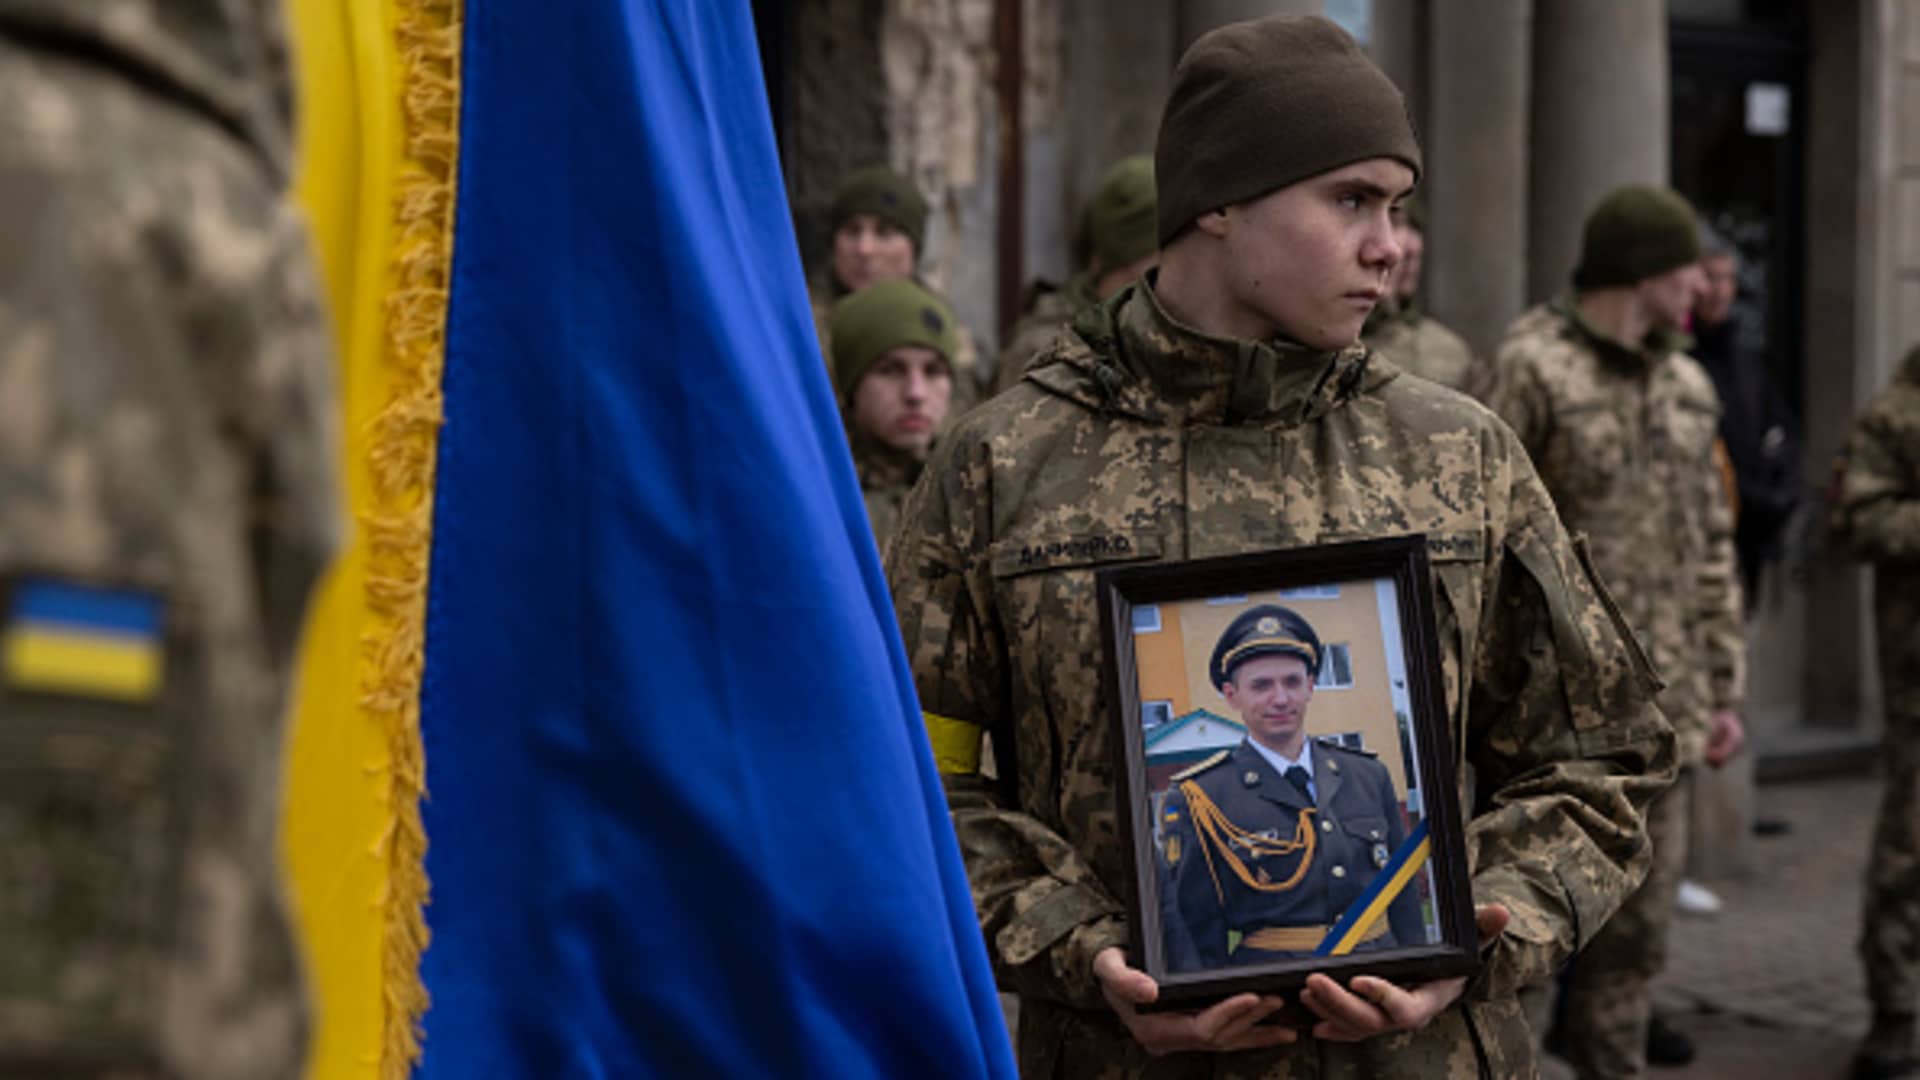 A joint funeral takes place at 'Saint's Peter and Paul Garrison Church', for two soldiers who died in the east of the country during recent fighting, on March 08, 2022 in Lviv, Ukraine.